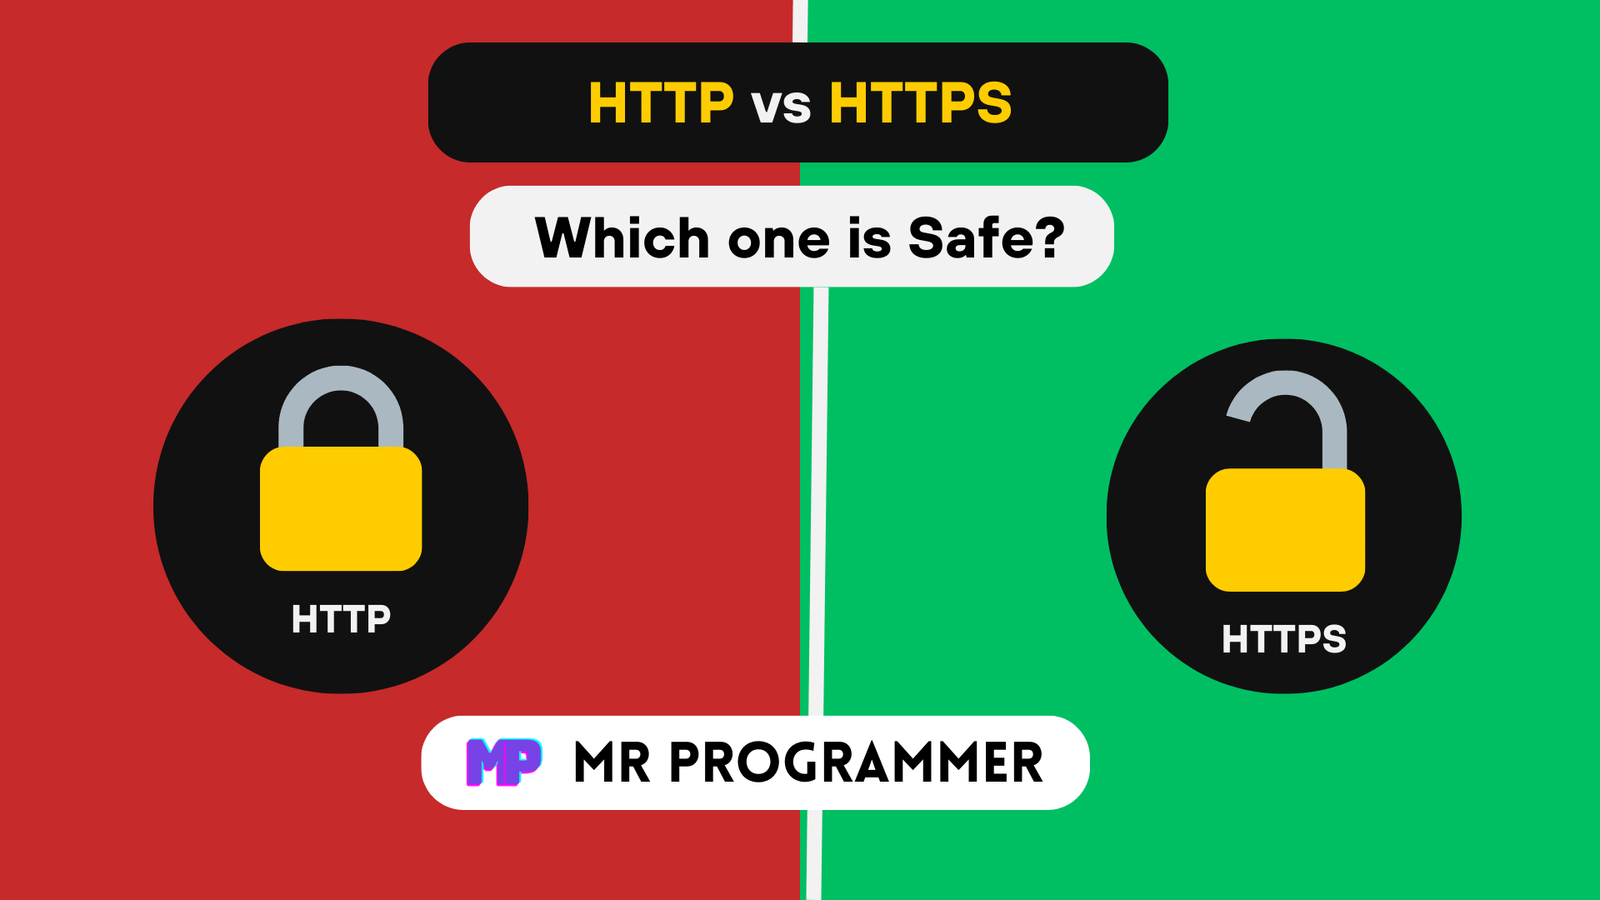 What Is the Difference Between HTTP vs HTTPS Which Is One Safe